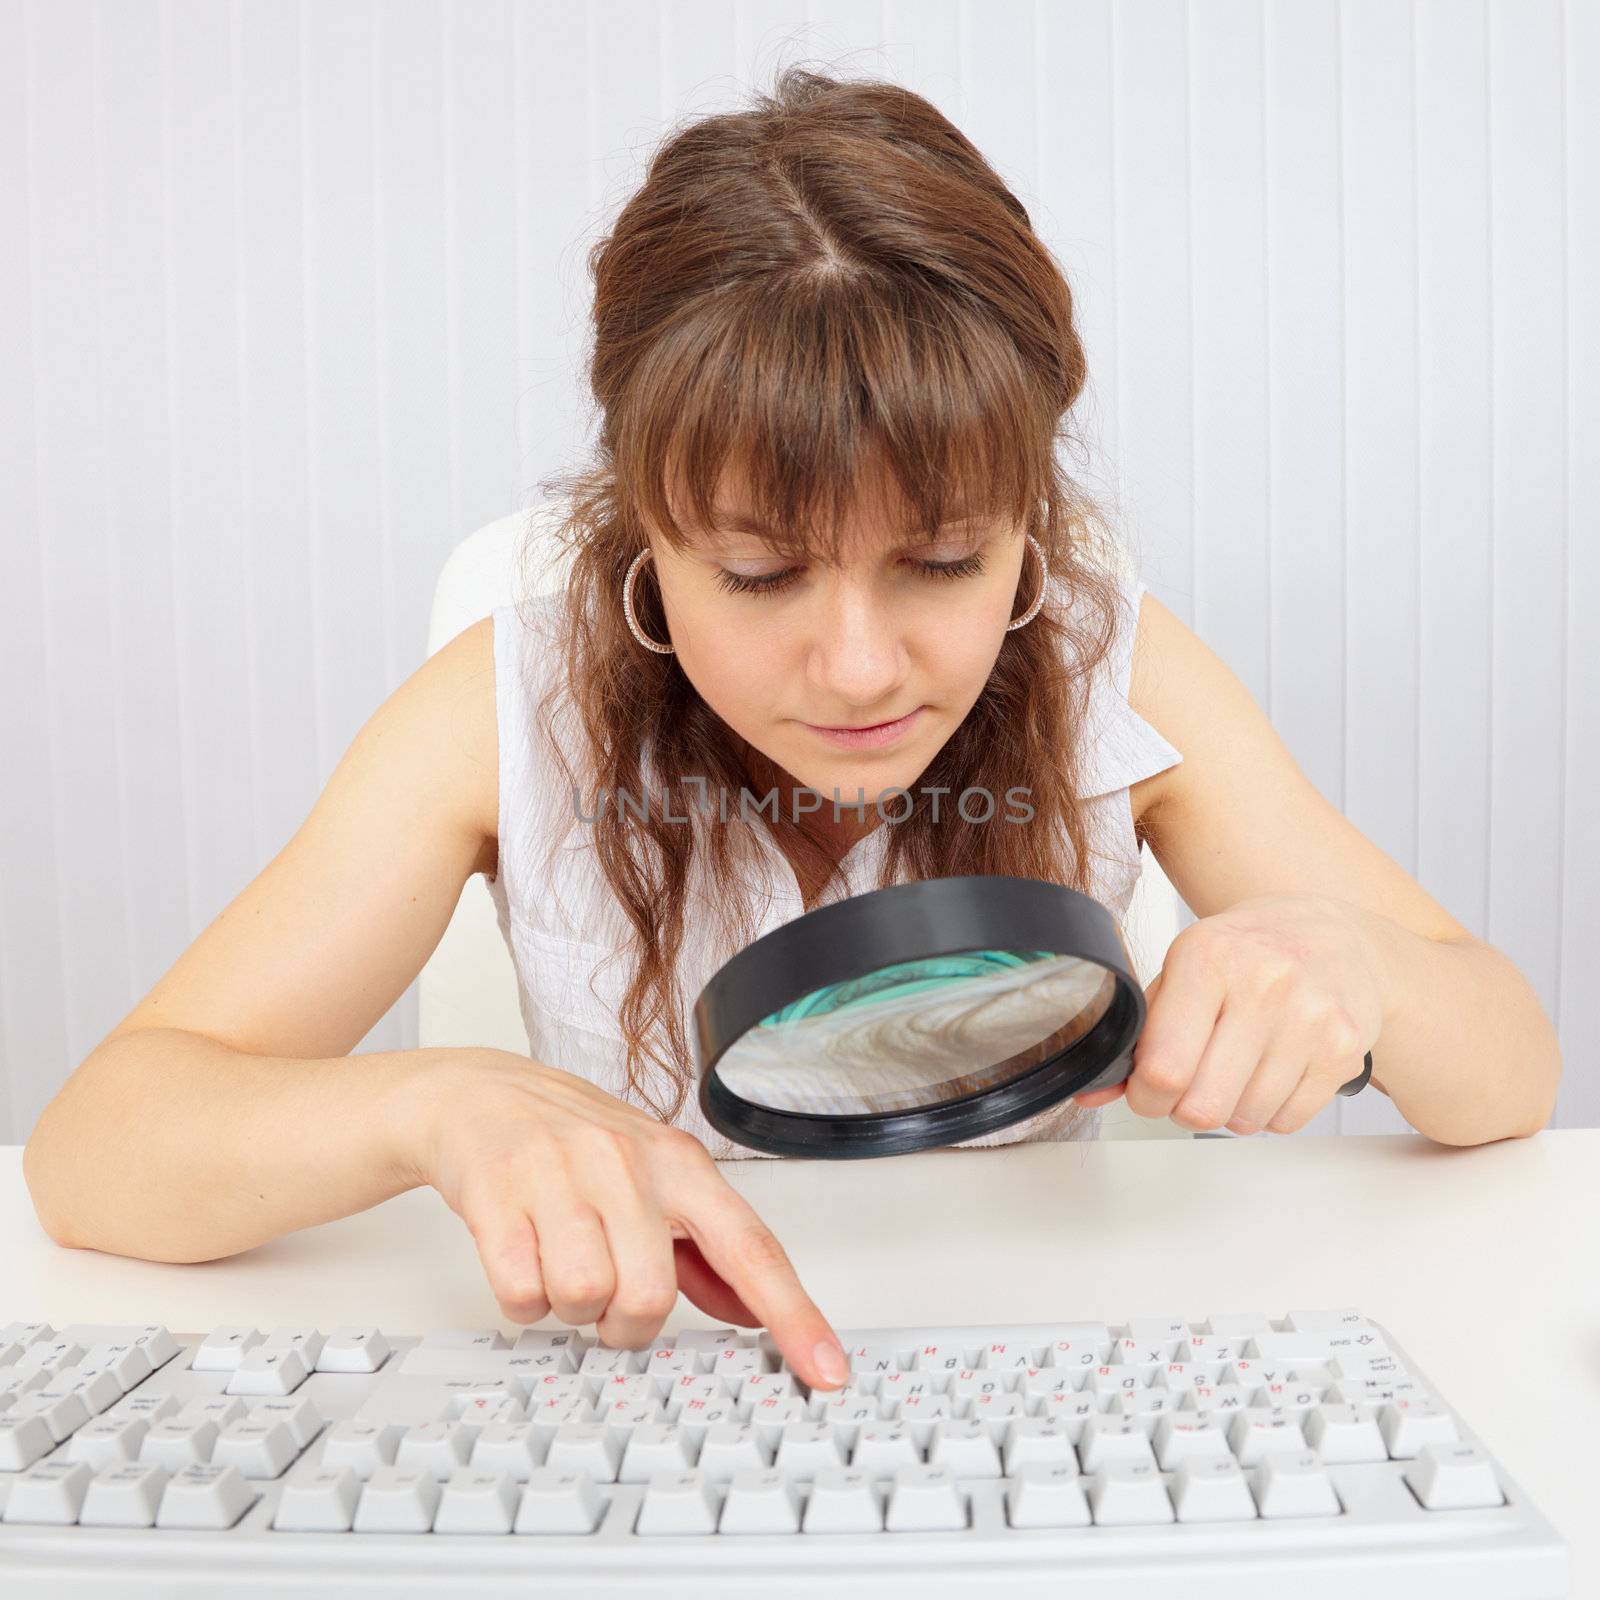 Girl with poor eyesight works with computer keyboard by pzaxe